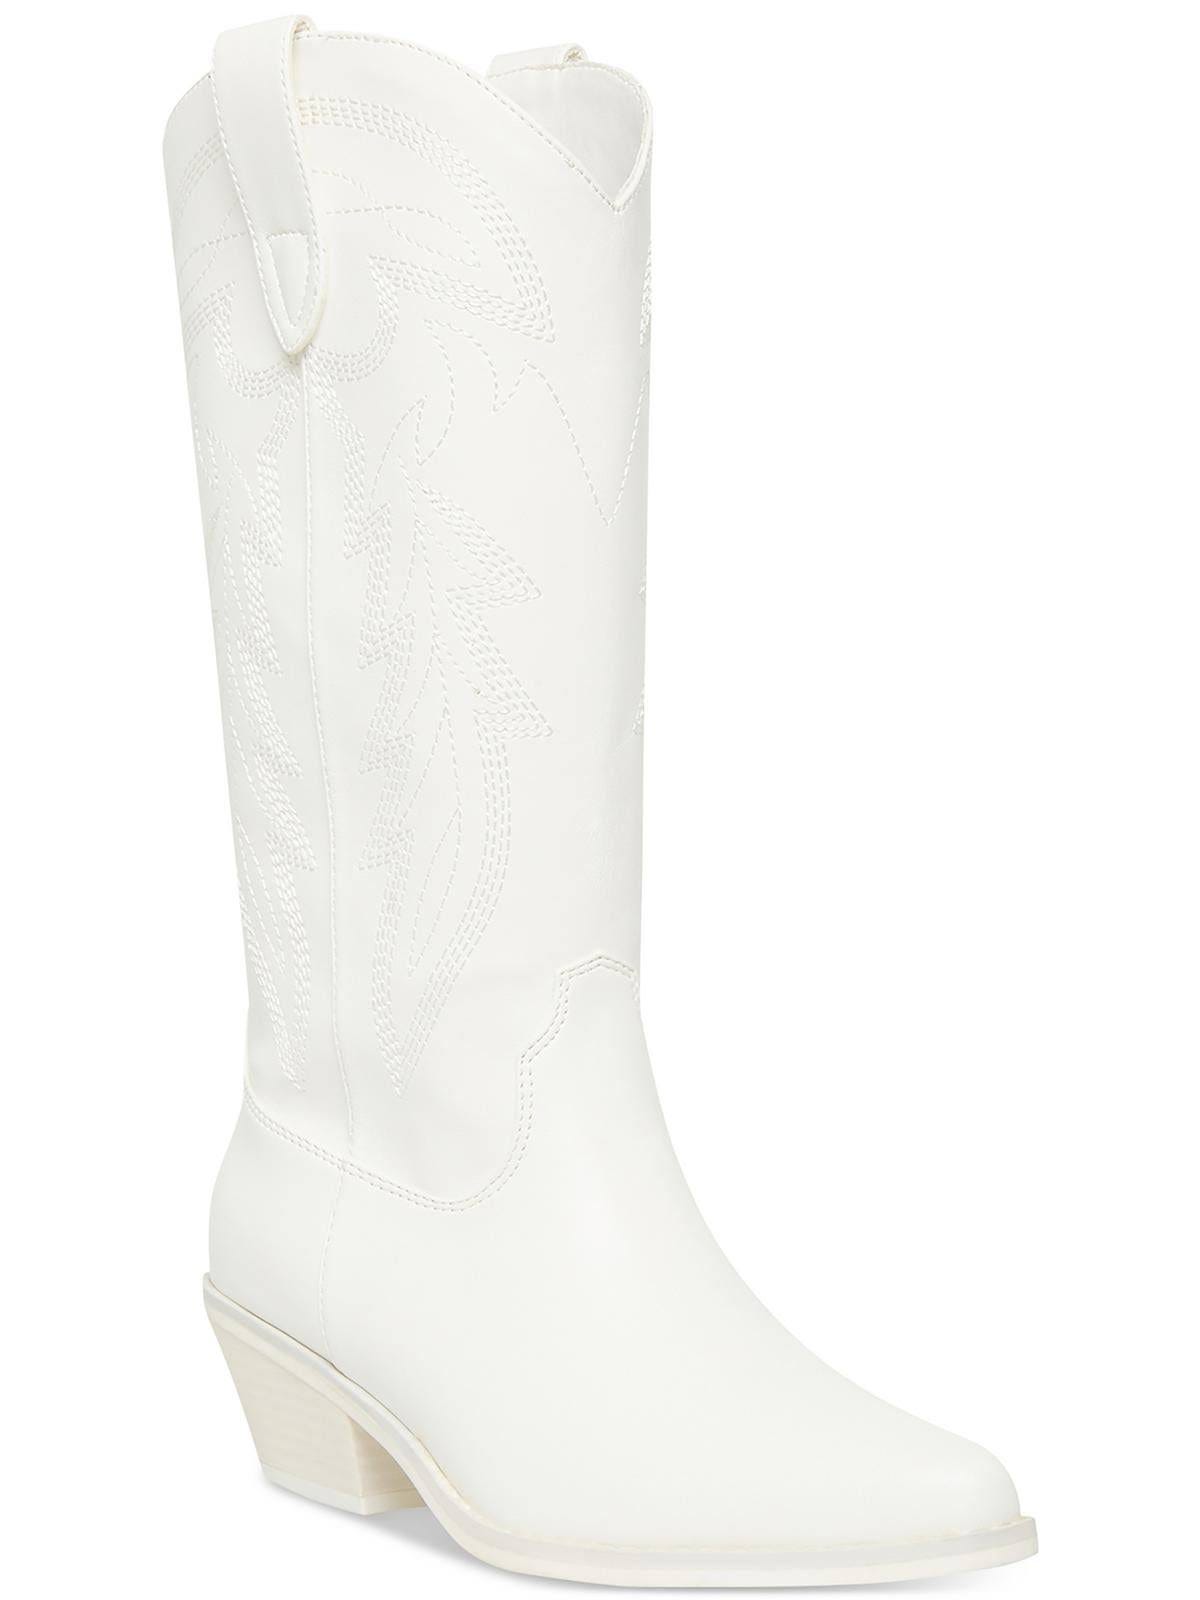 Madden Girl White Western Cowboy Boots for Women | Image